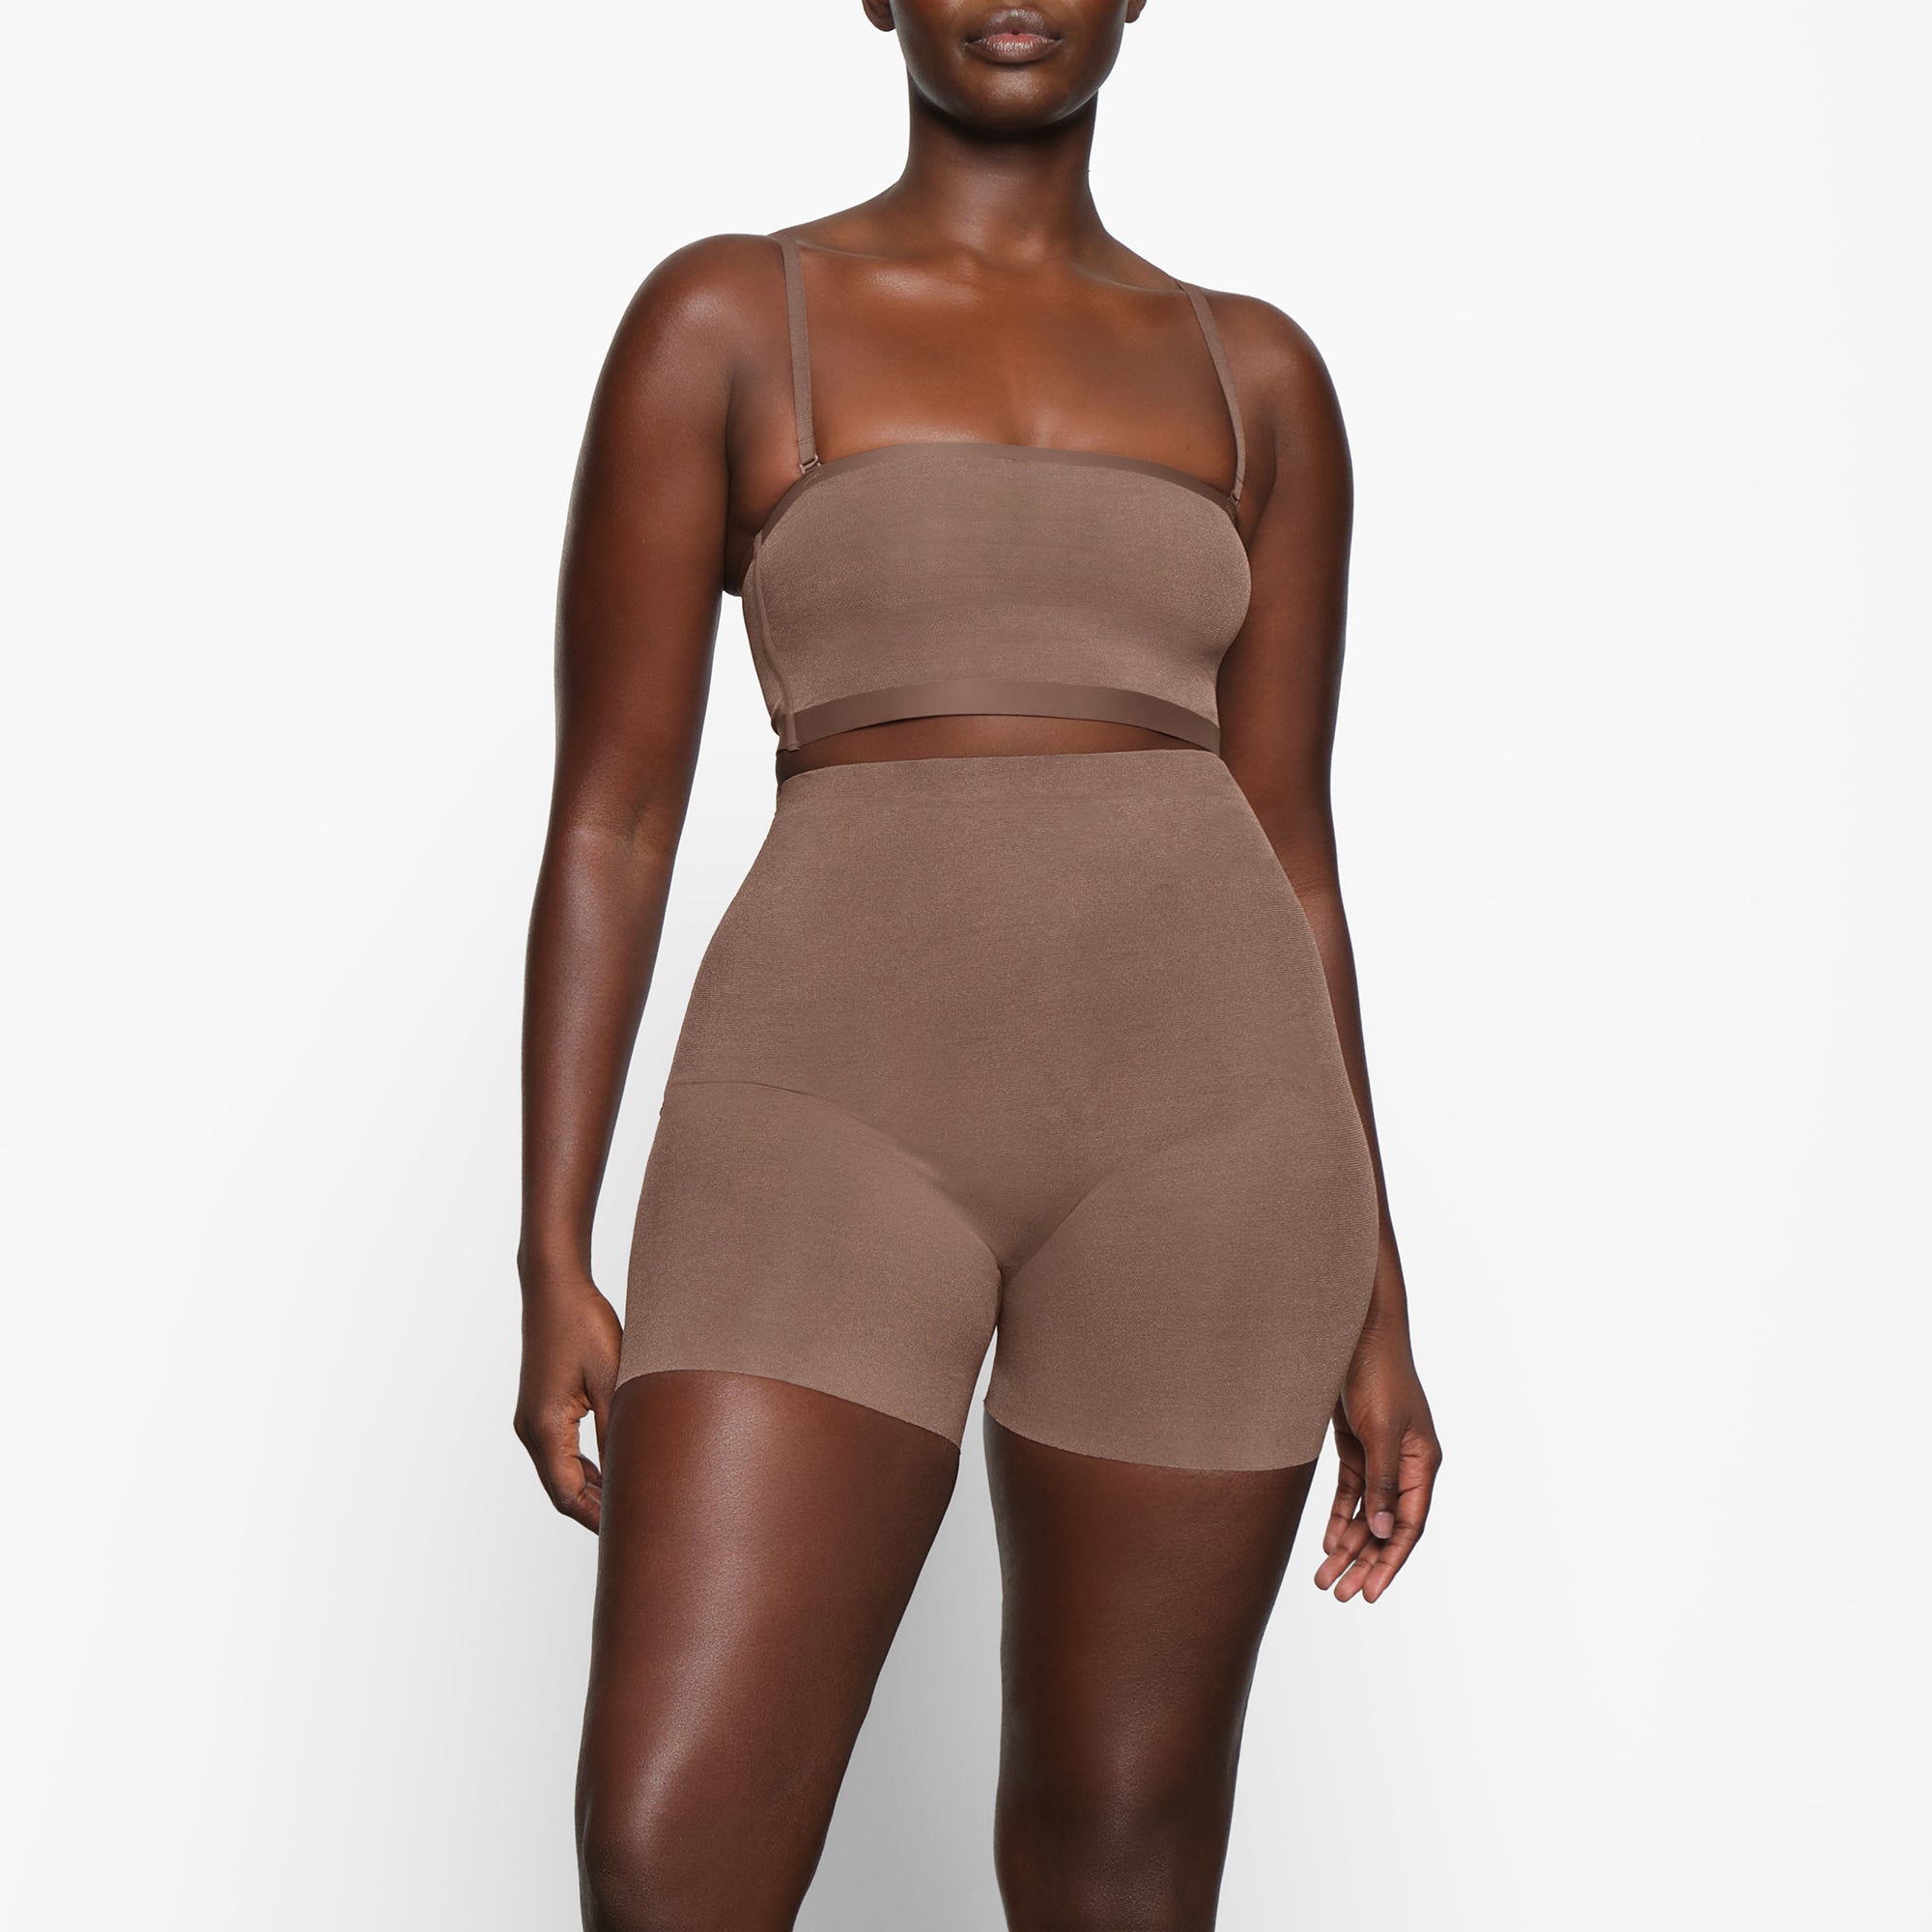 Skims Barely There Shapewear Low Back Short Sienna Medium Discontinued